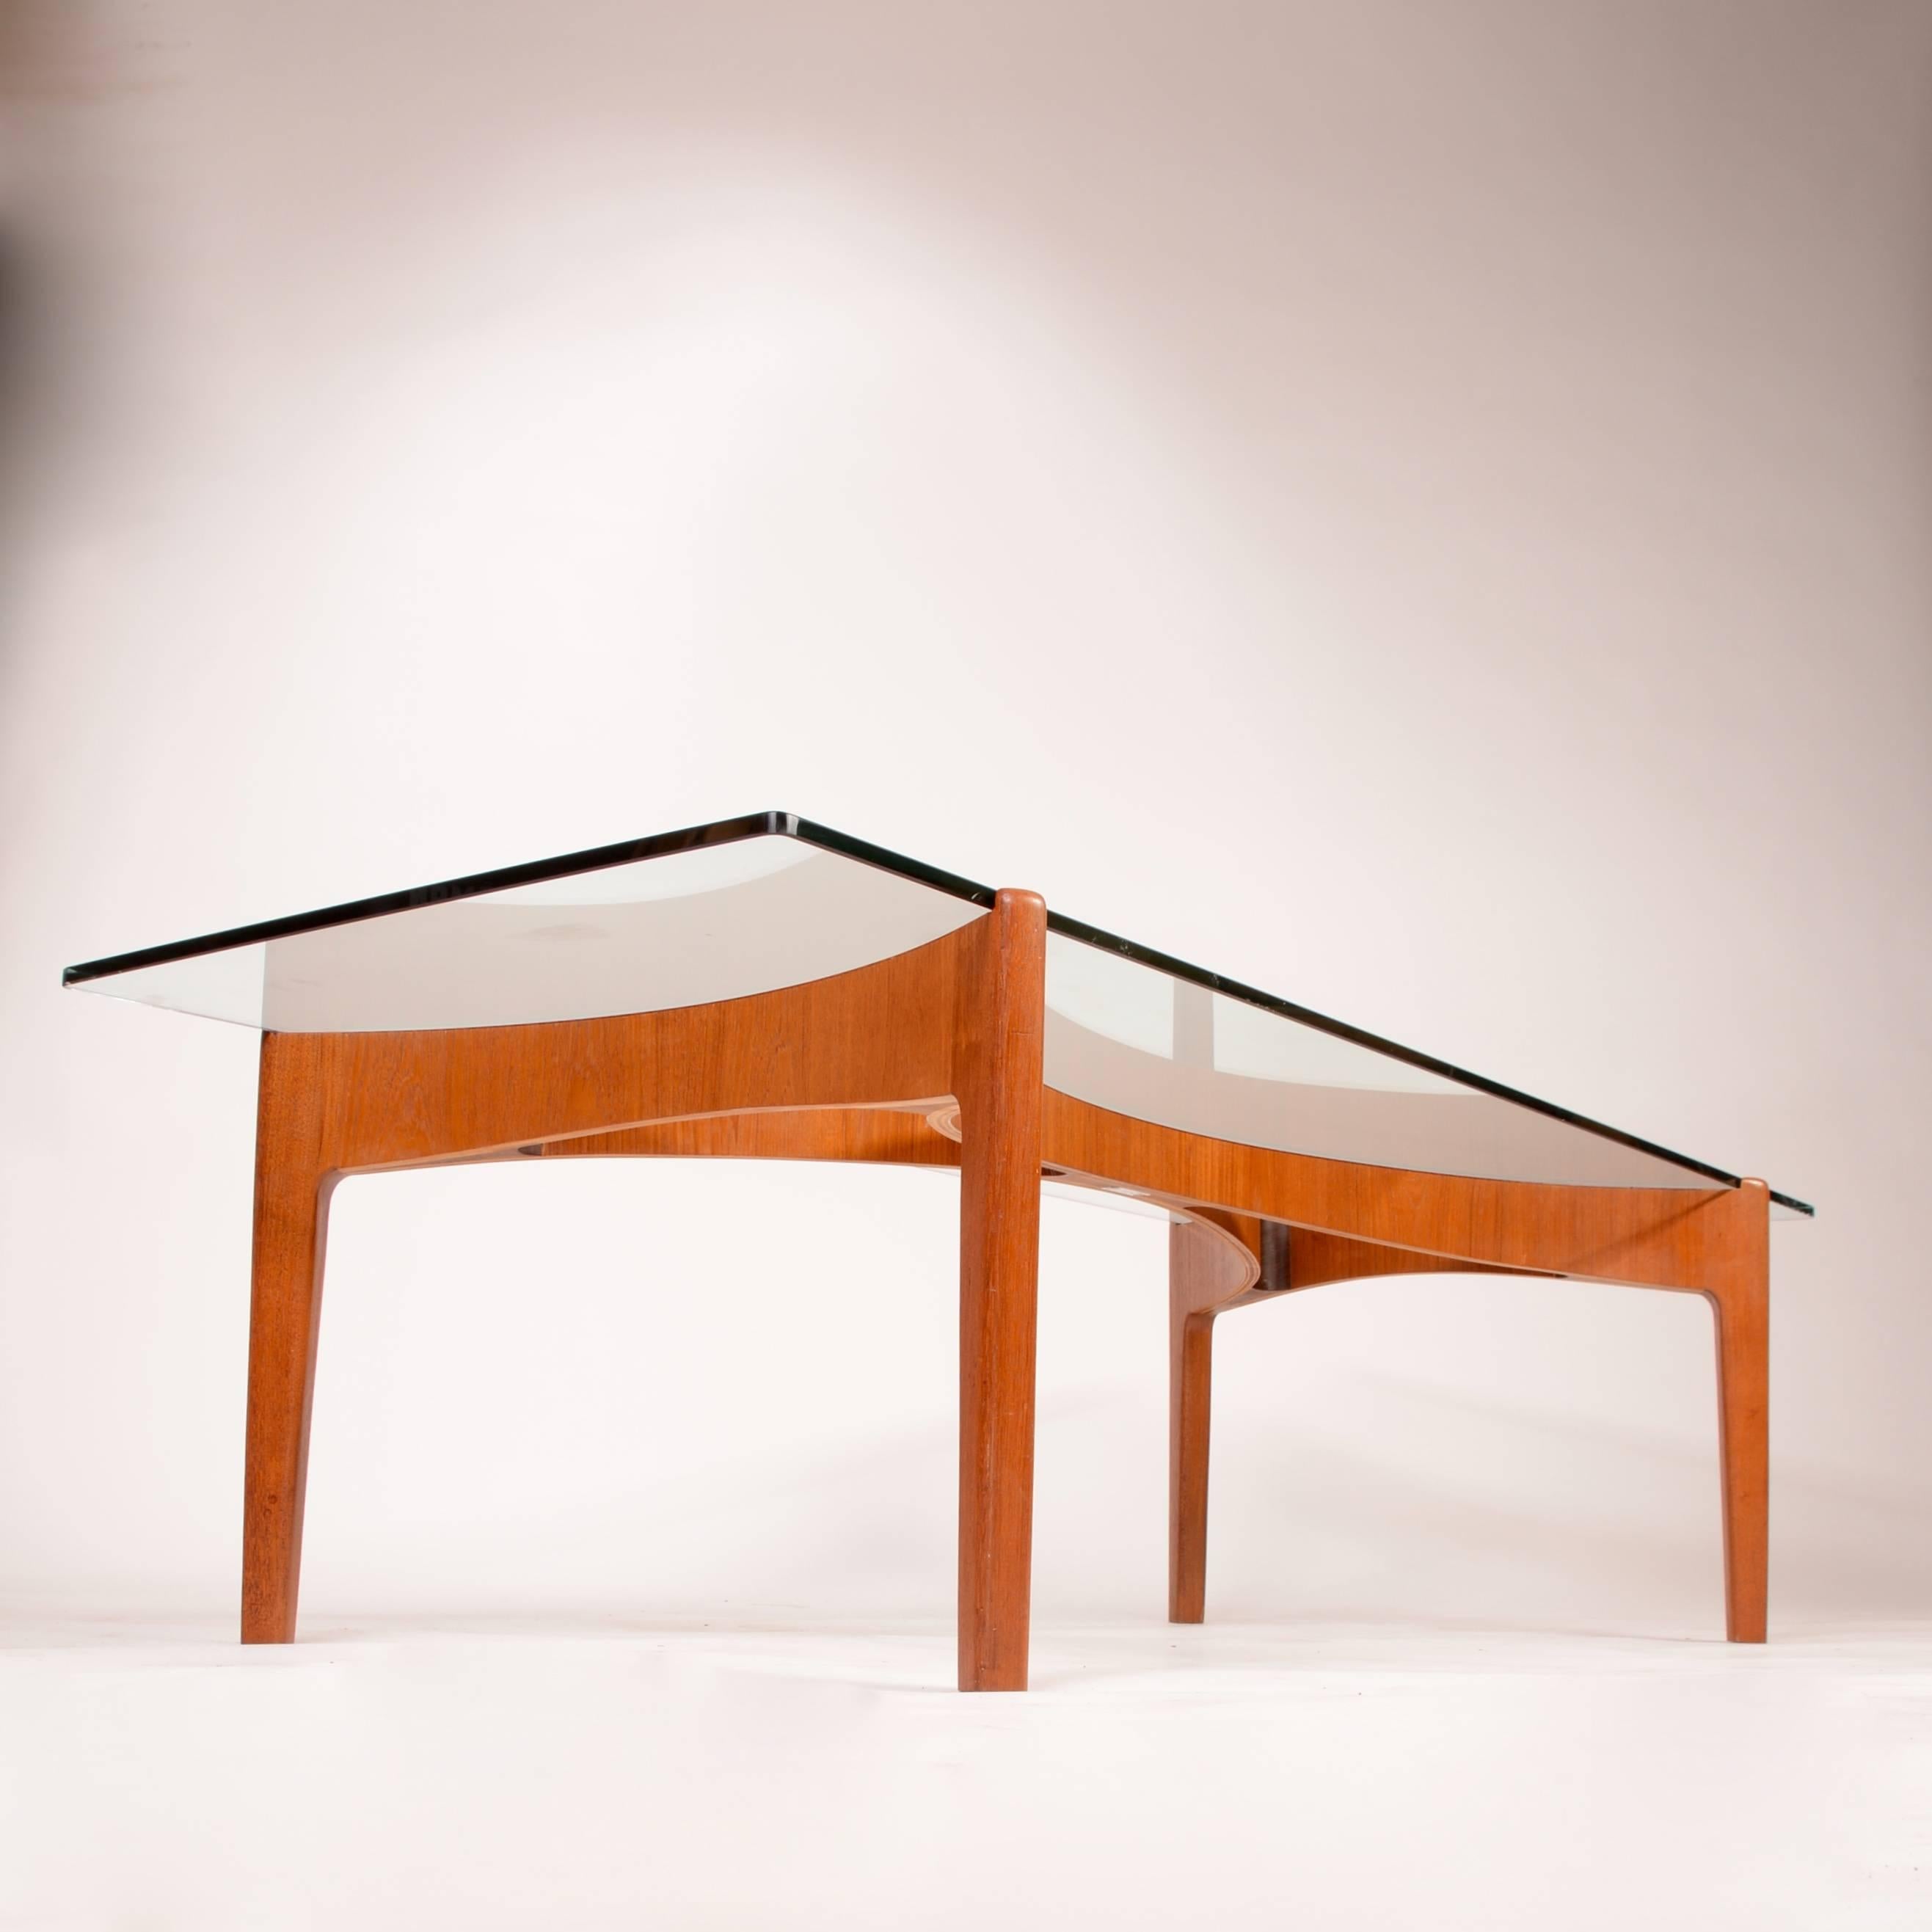 Sven Ellekaer Coffee Table in Teak In Excellent Condition For Sale In Los Angeles, CA